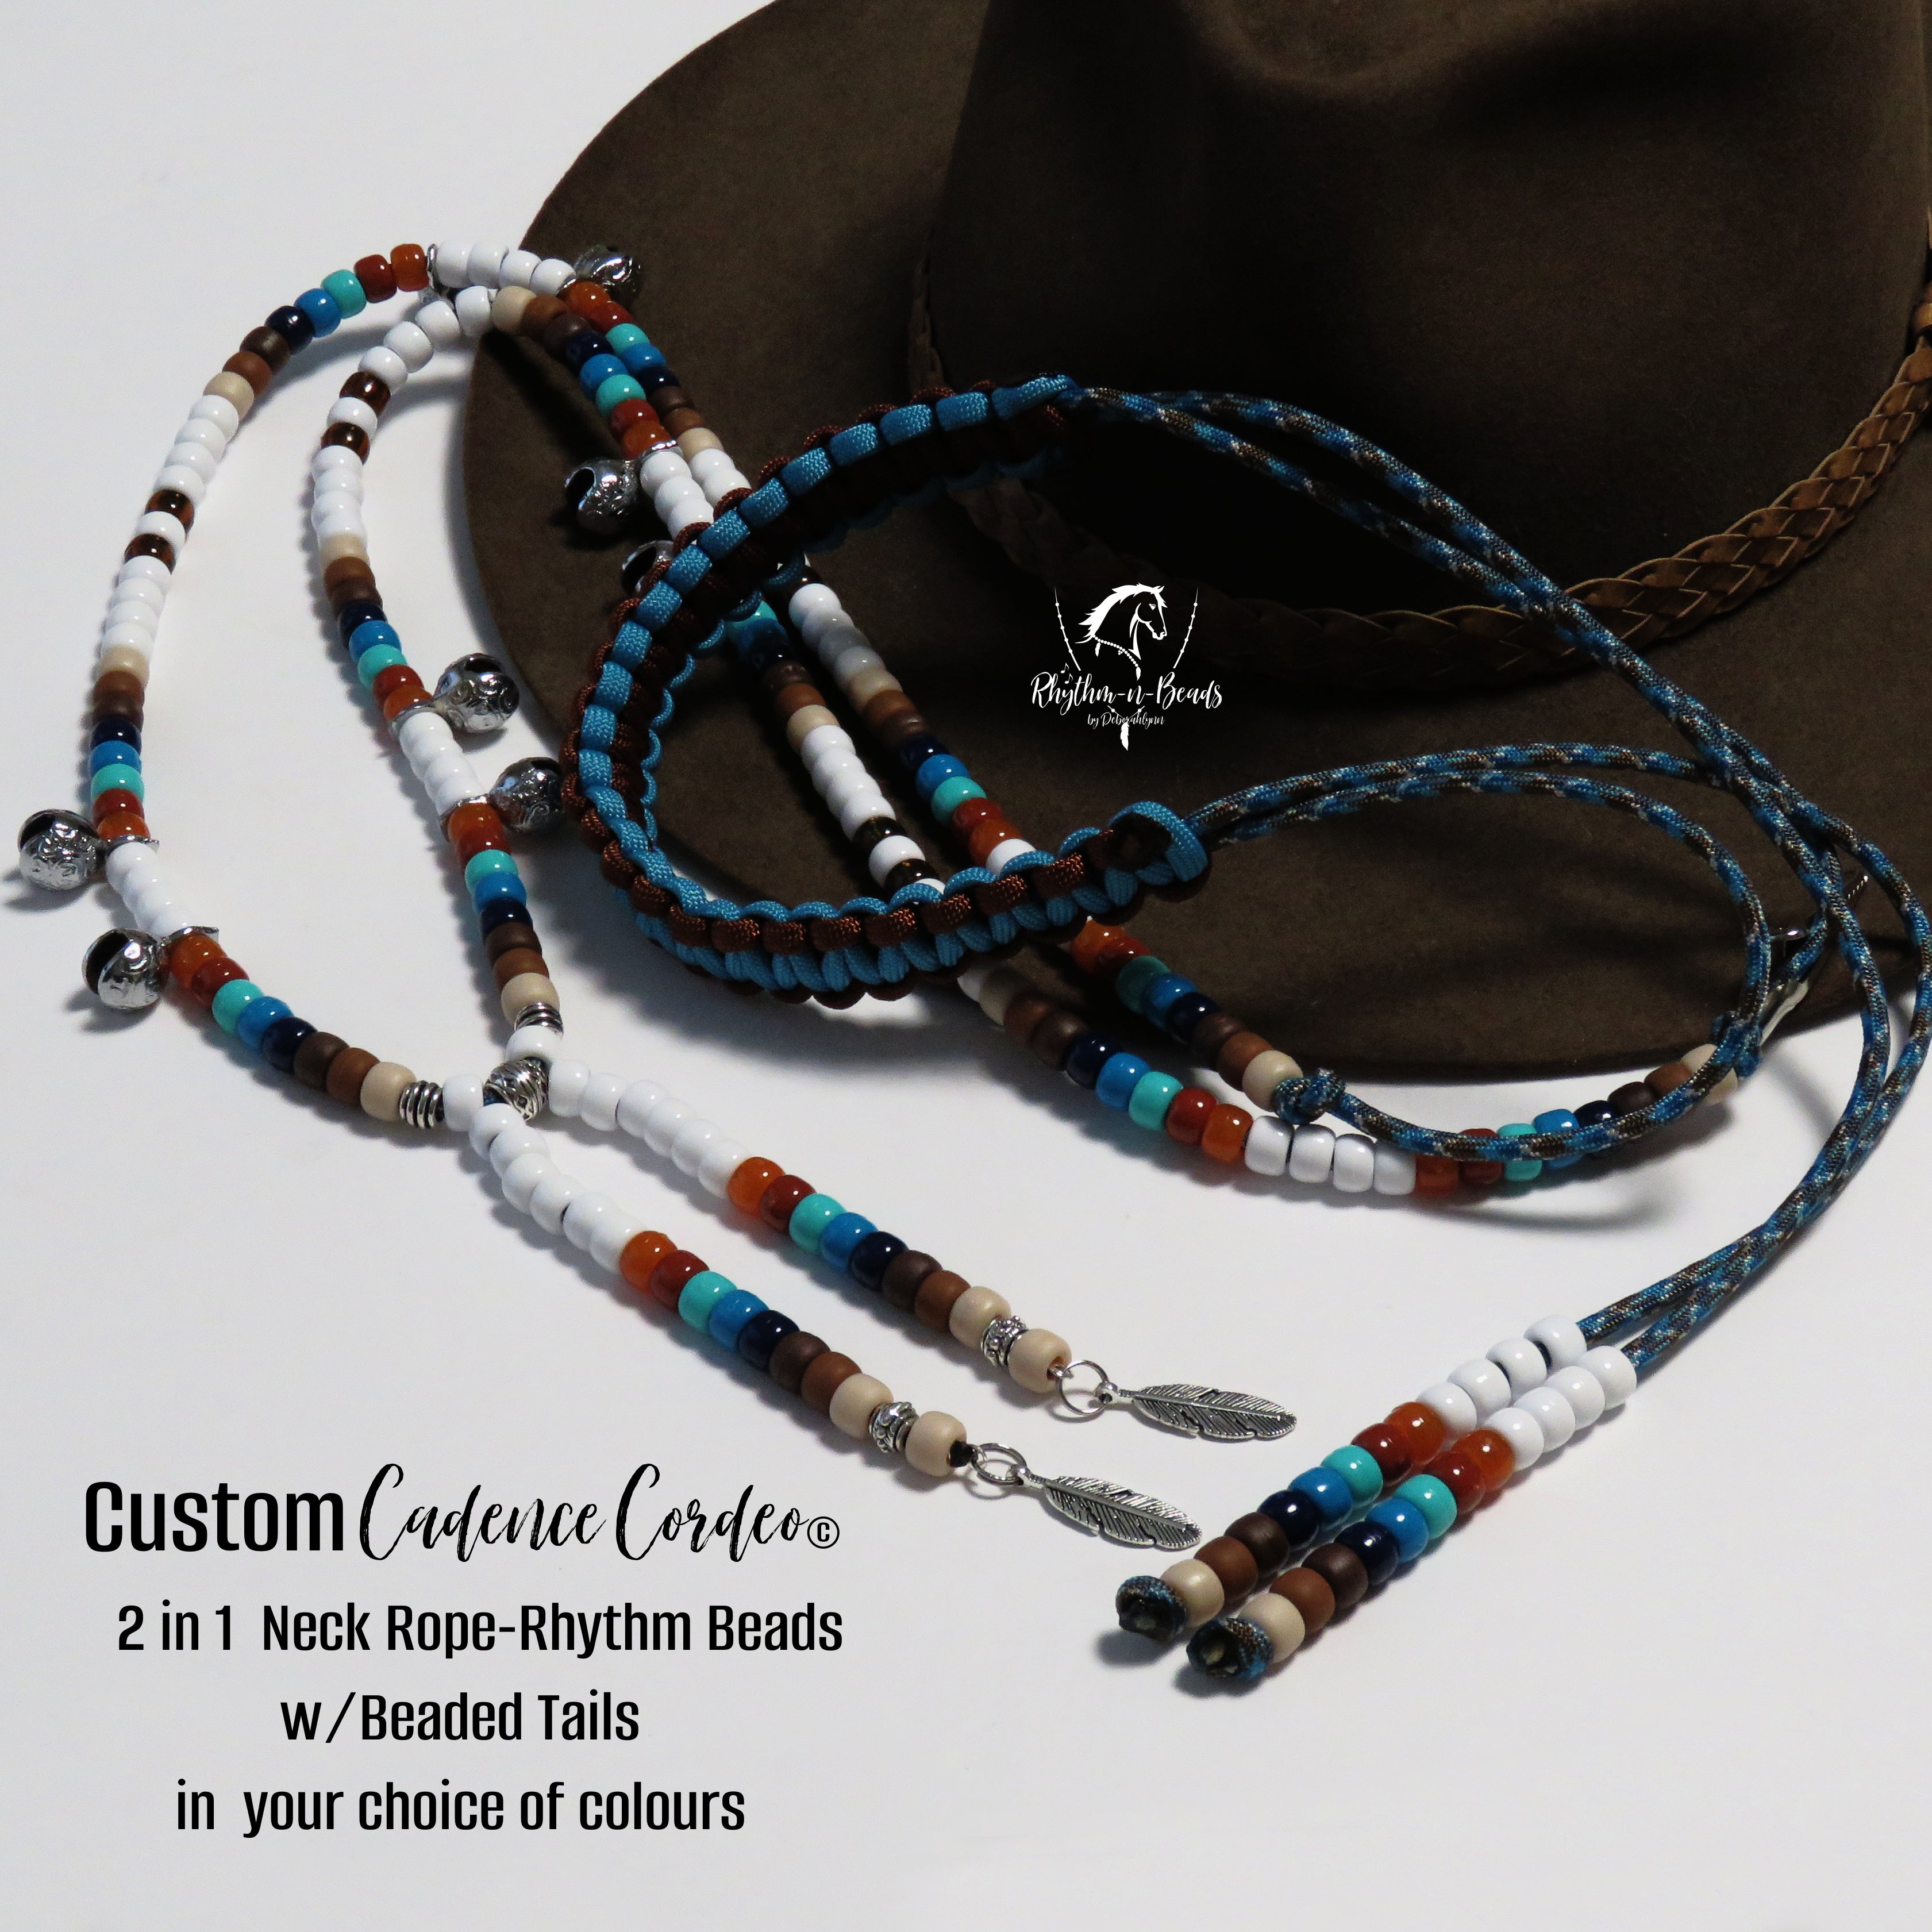 2 in 1 Cadence Cordeo© Neck Rope- Custom Colours